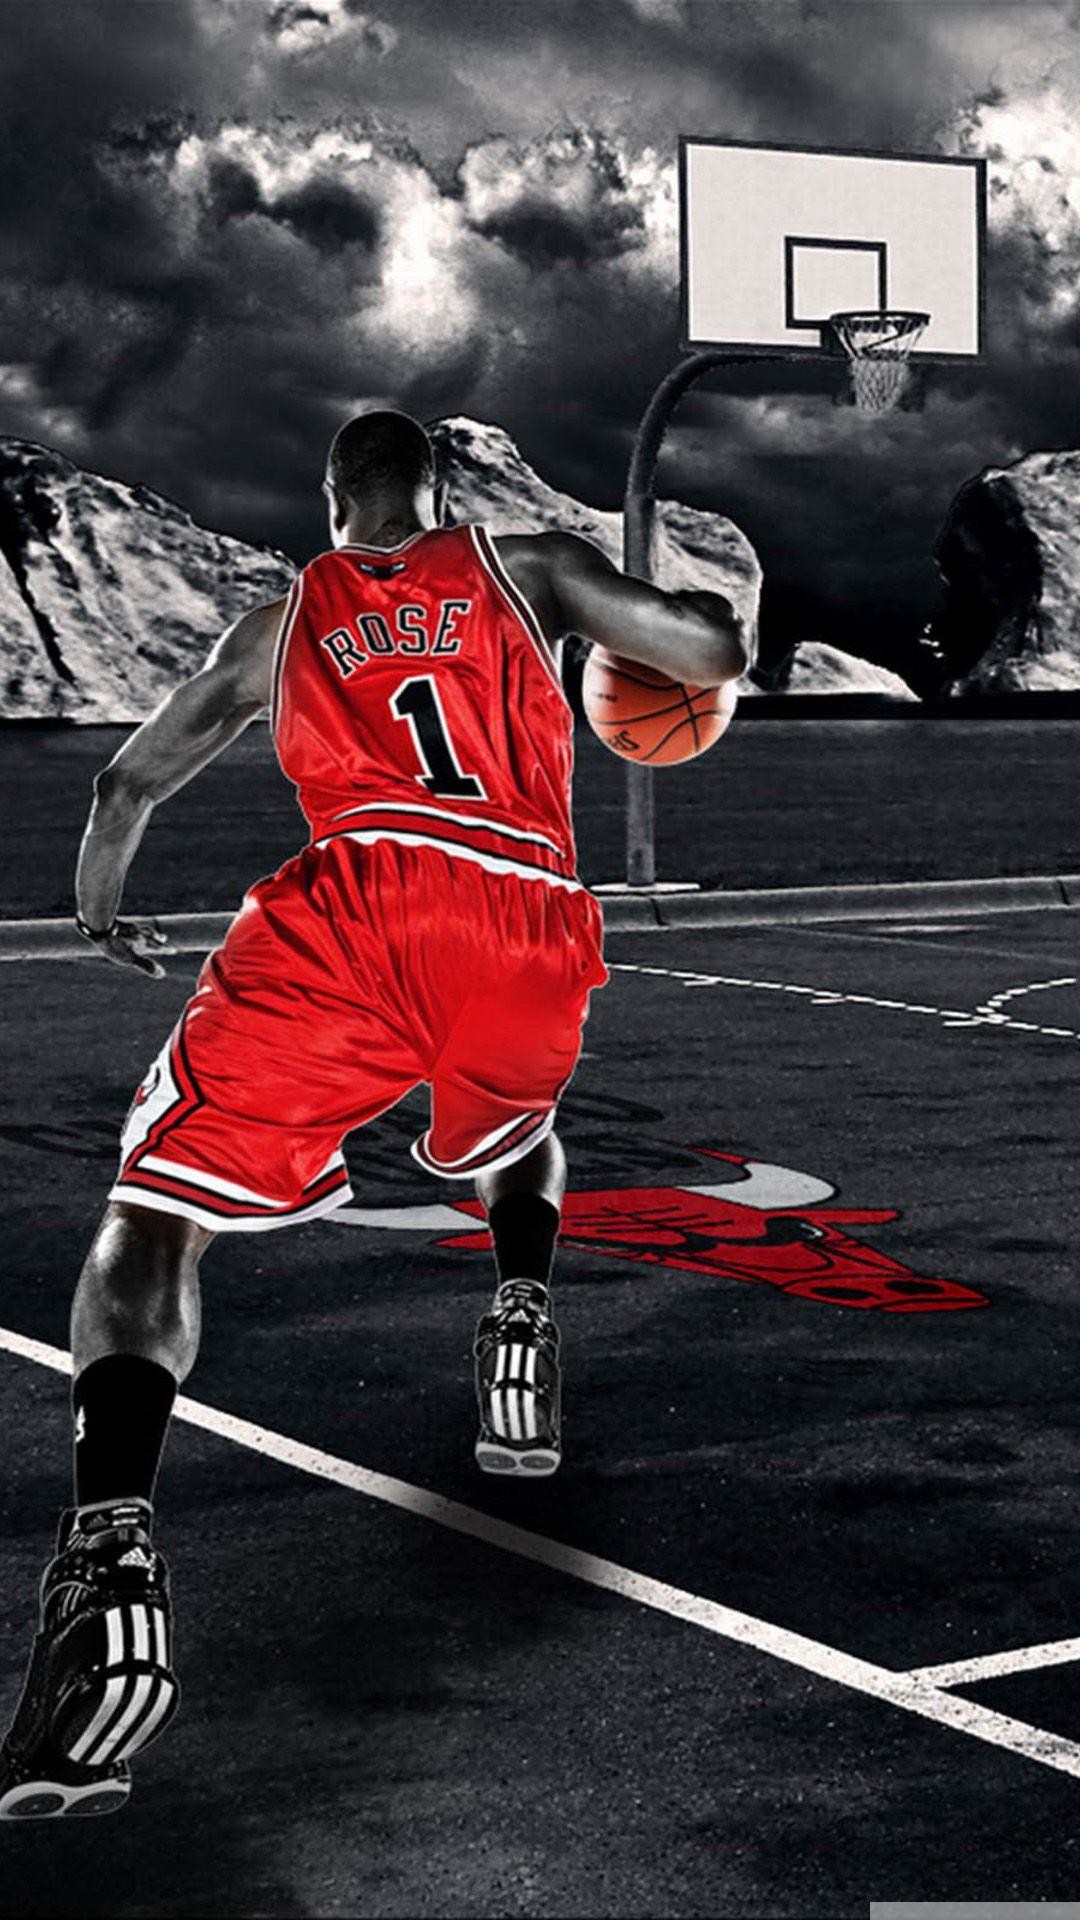 Cool Basketball Wallpapers for iPhone (60+ images)